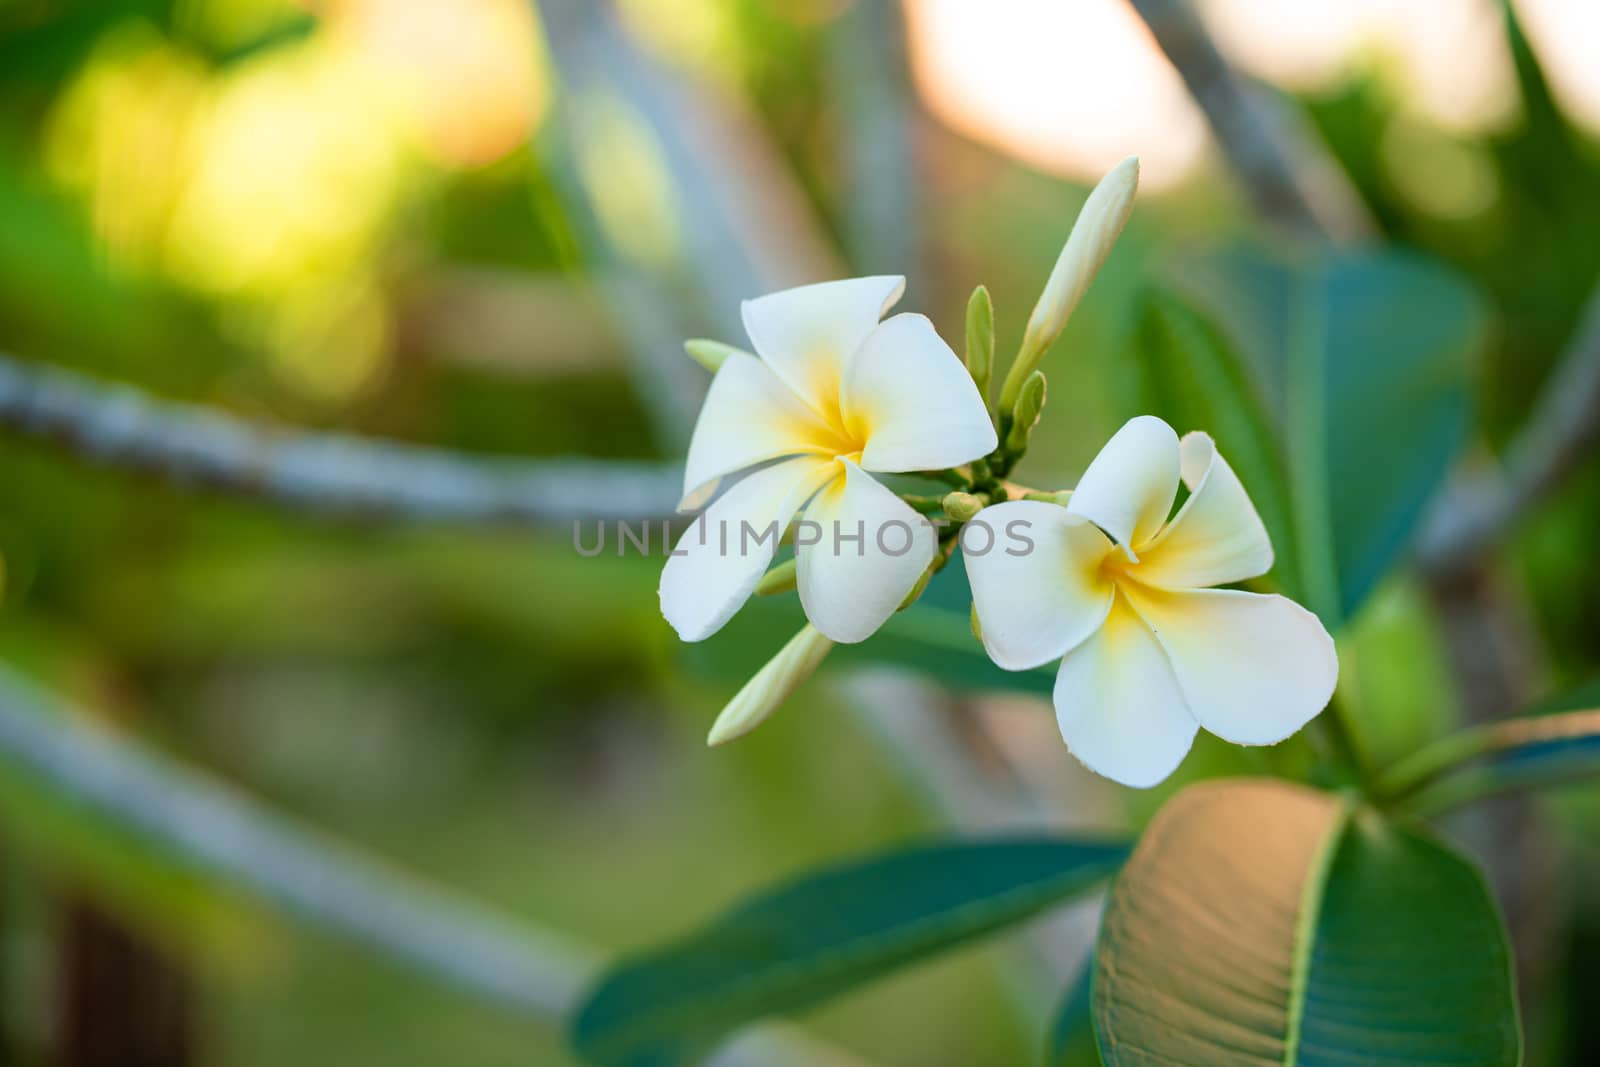 Blooming white frangipani flower in a tropical garden.